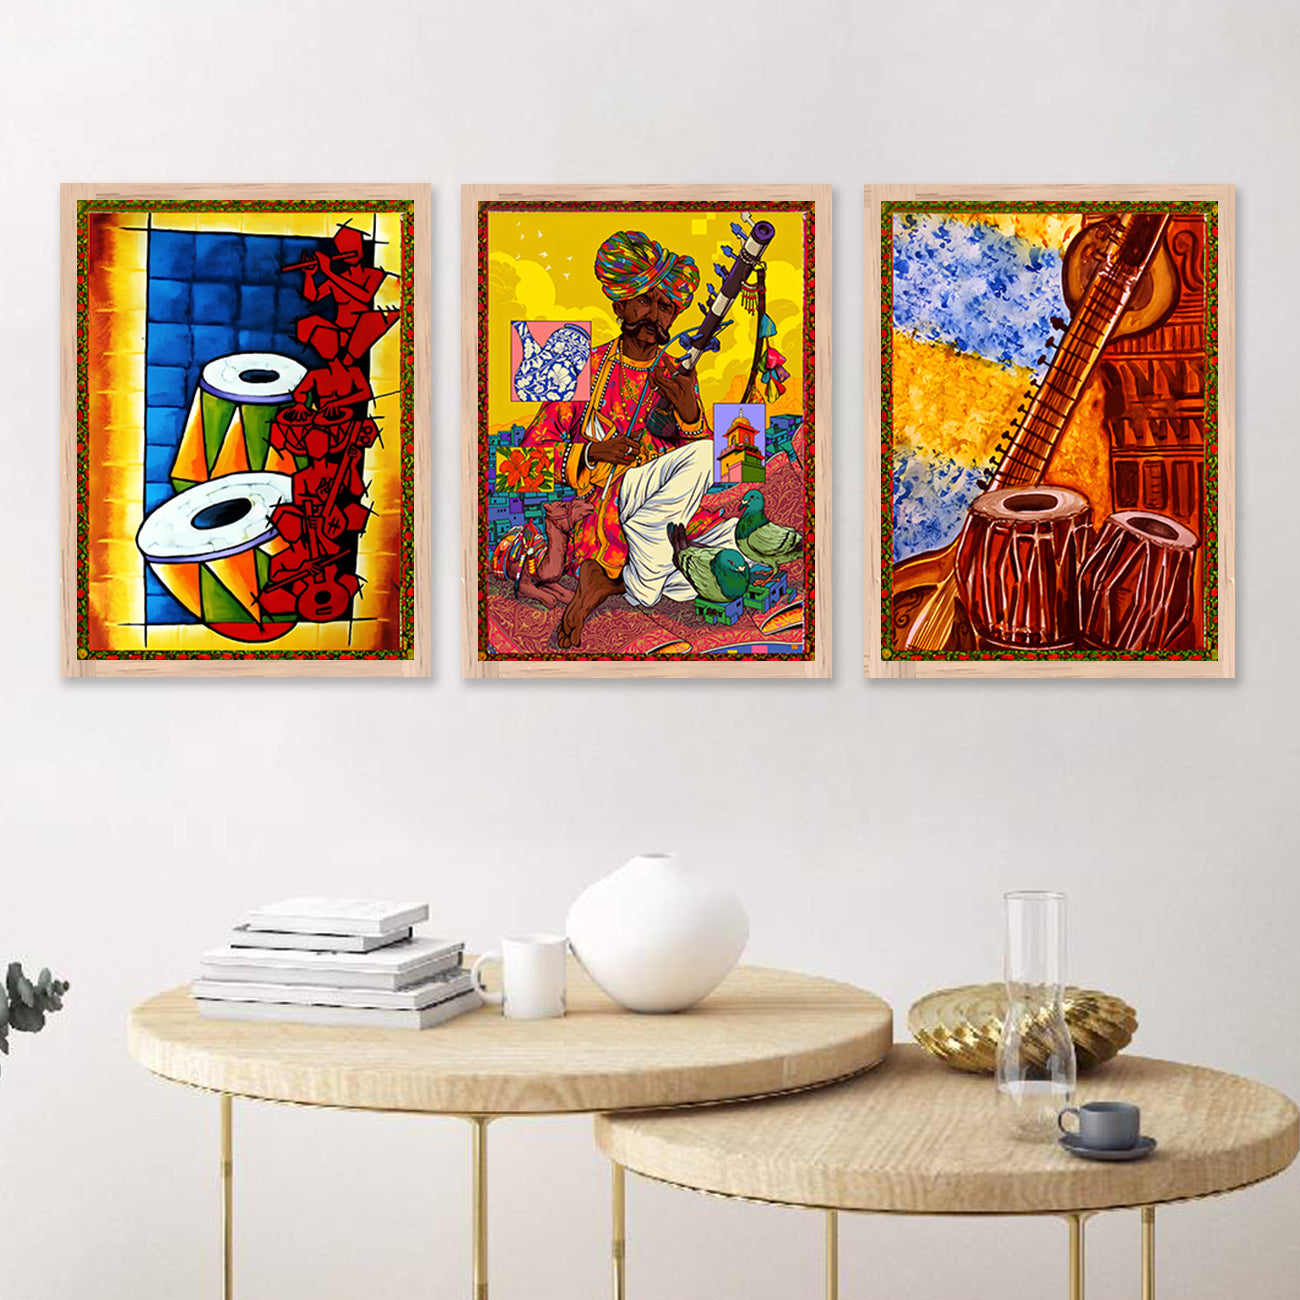 Rajasthani Art Painting for Living Room Bedroom Home and Office Wall Decor-Kotart